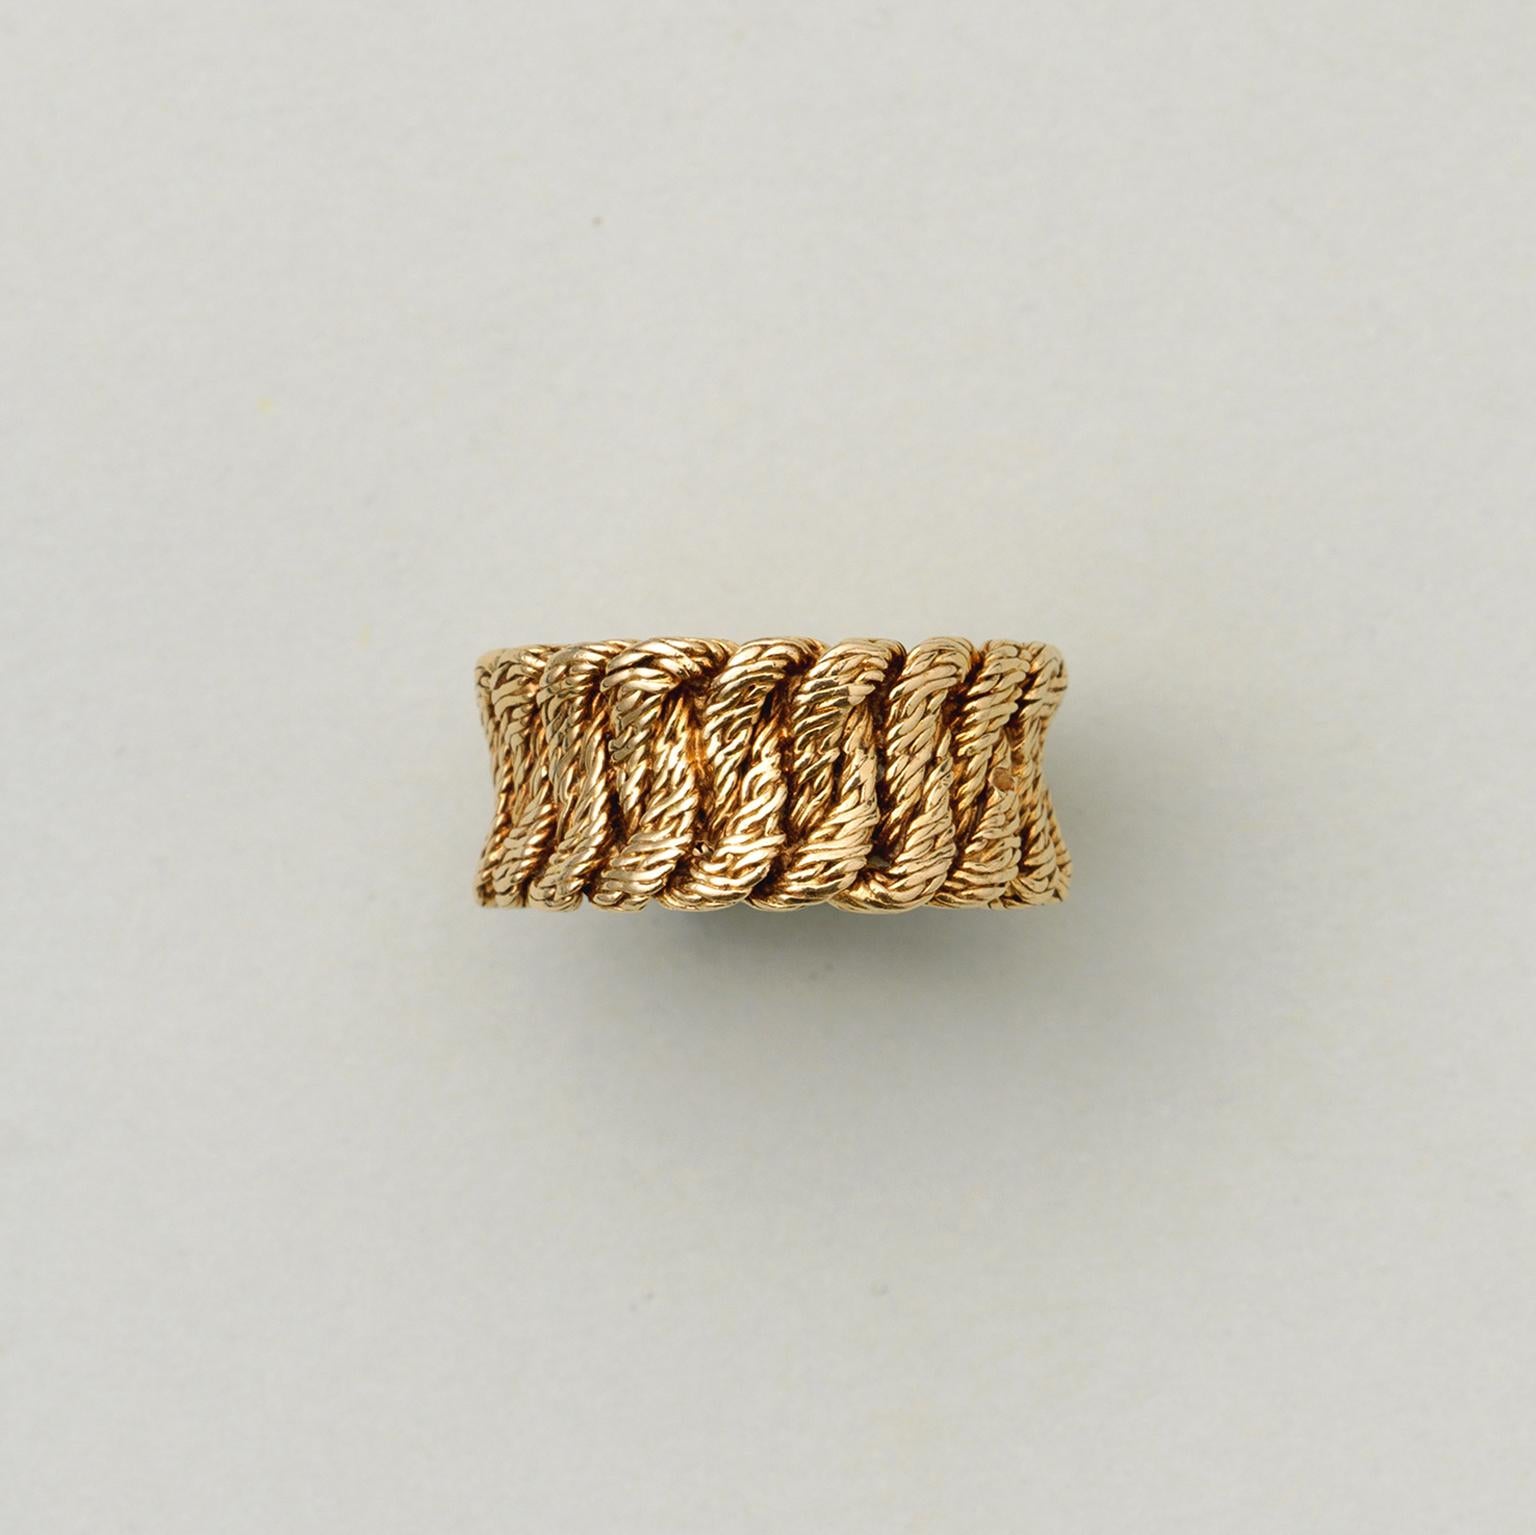 A 18 carat yellow gold ring of braided gold, by Georges Lenfant, master goldsmith of links and chains , circa 1970, France.
ring size: 16.25-16.5 mm. 6 US
weight: 12.98 gram.
width: 8 – 10 mm.
